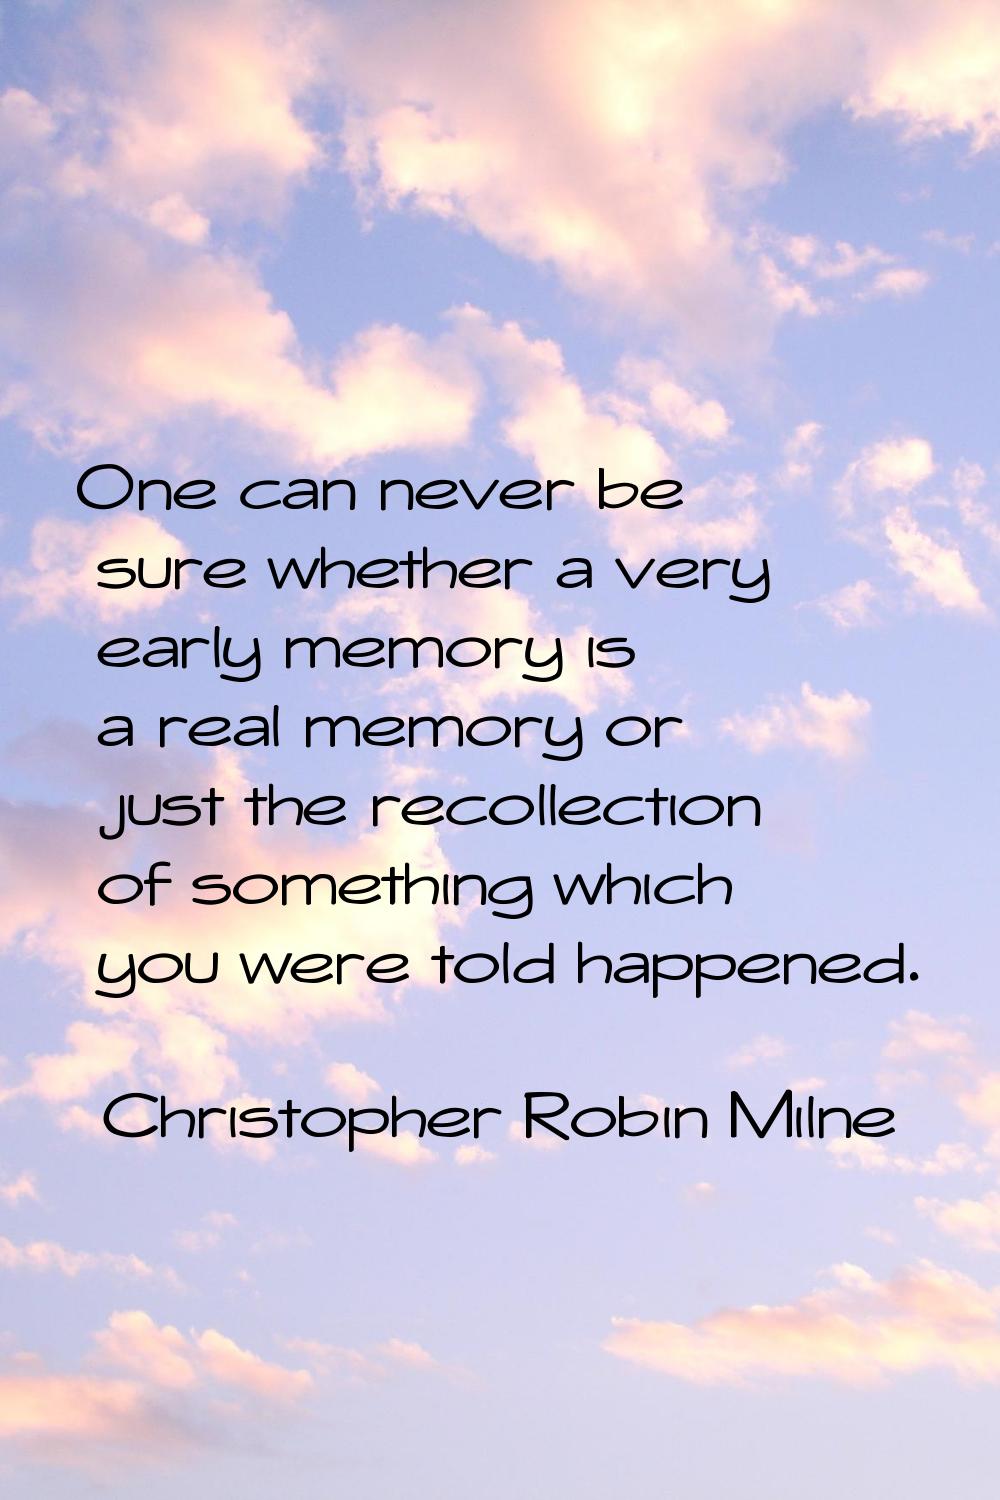 One can never be sure whether a very early memory is a real memory or just the recollection of some